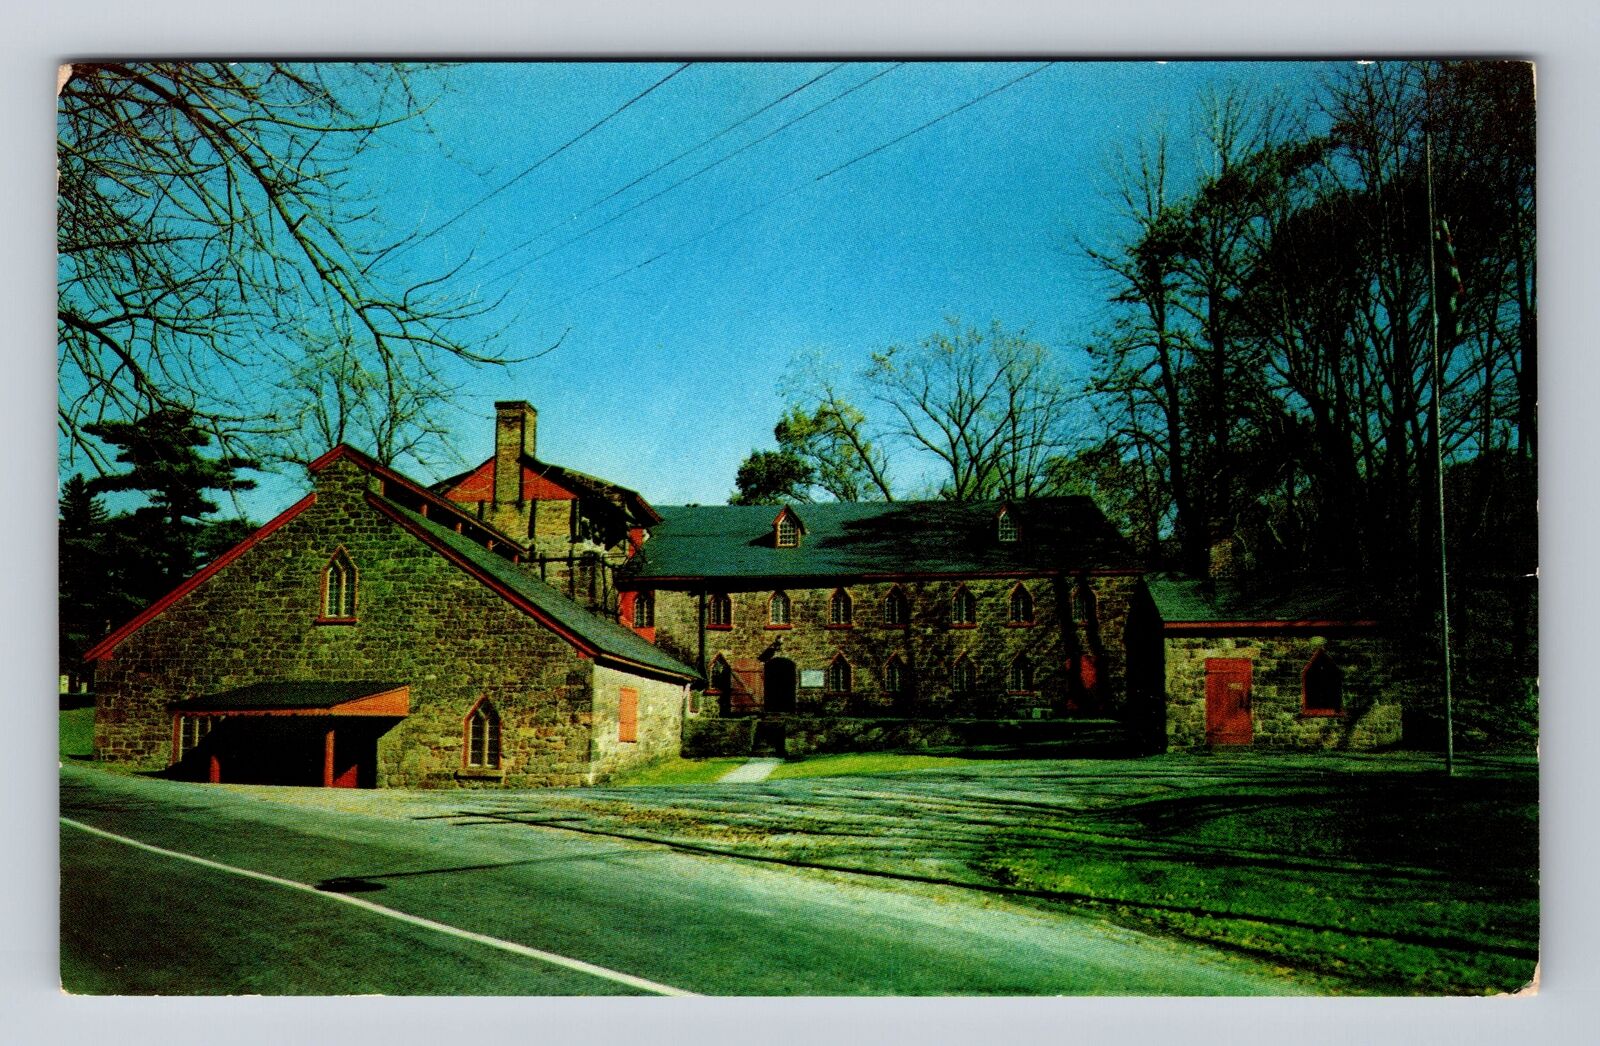 Cornwall PA-Pennsylvania, Old Charcoal Furnace, Antique, Vintage Postcard